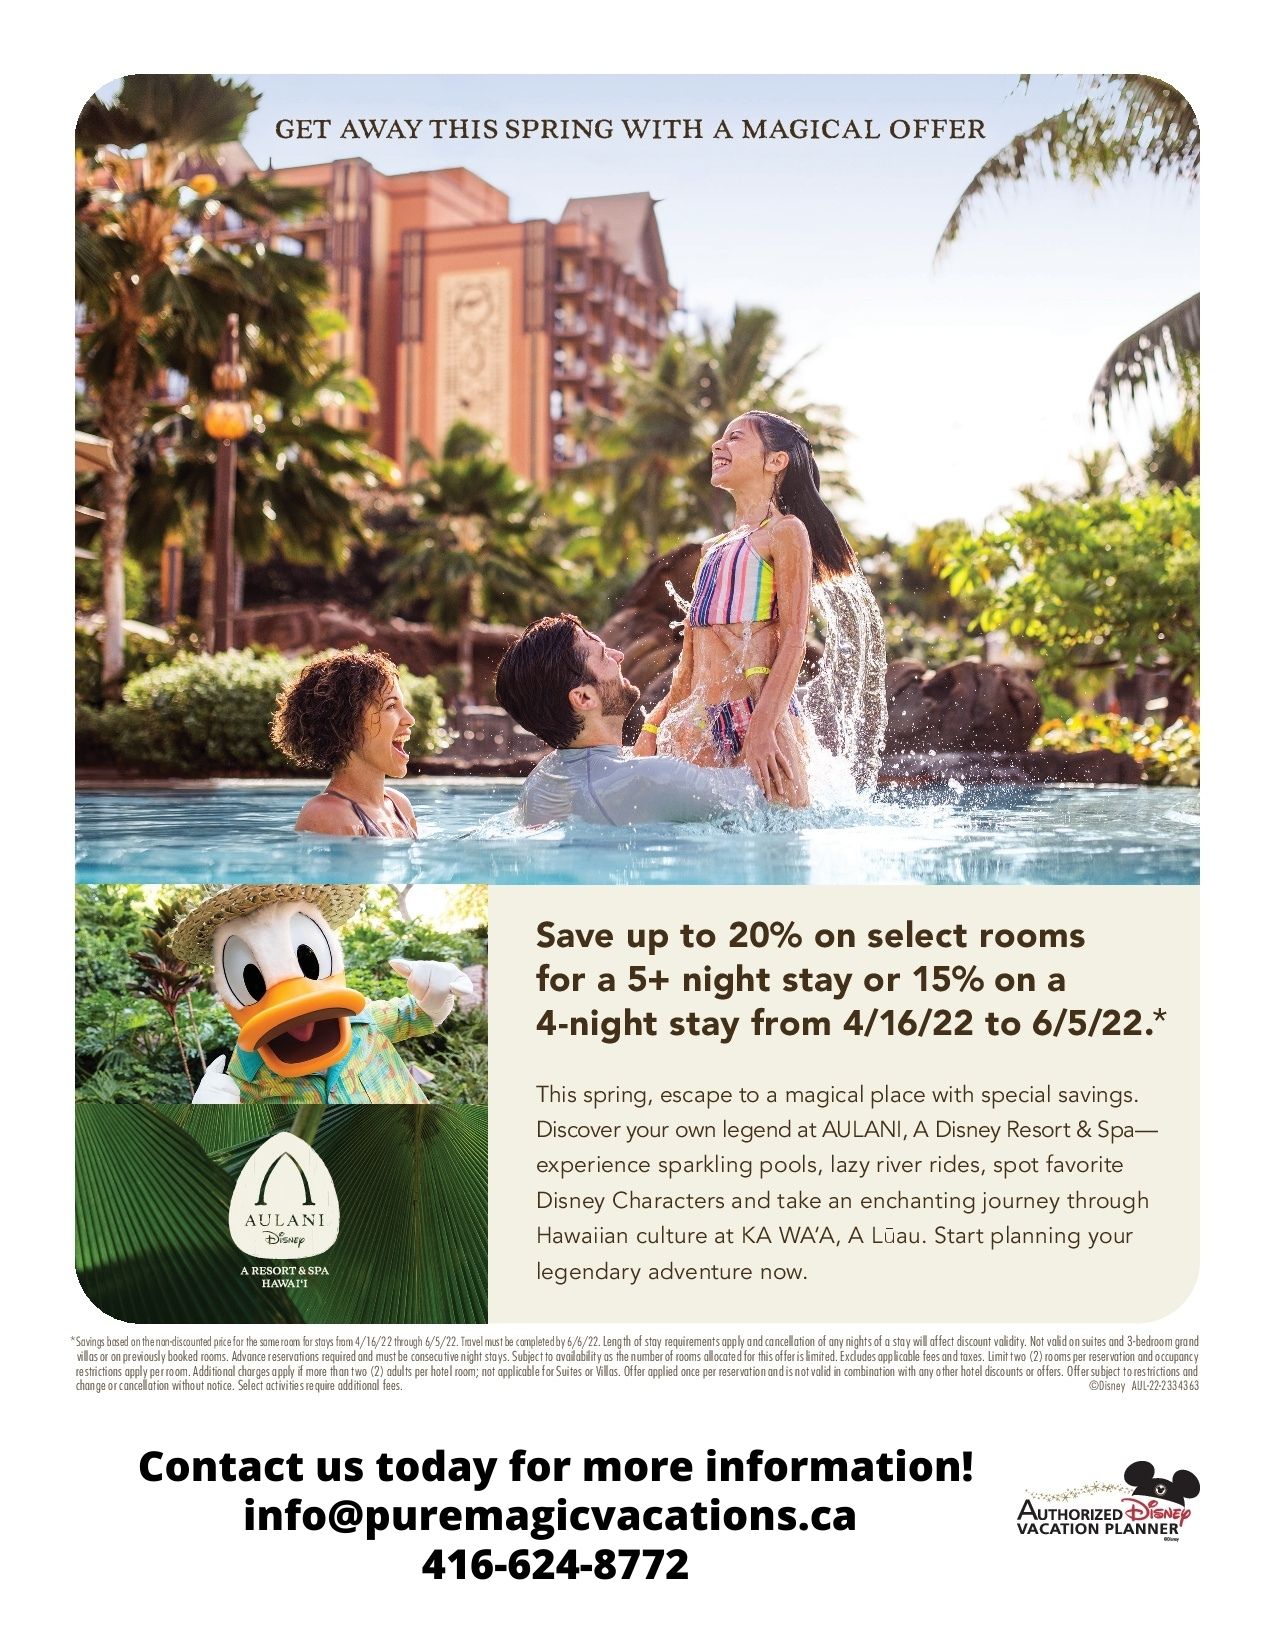 Get Away This Spring with a Magical Offer